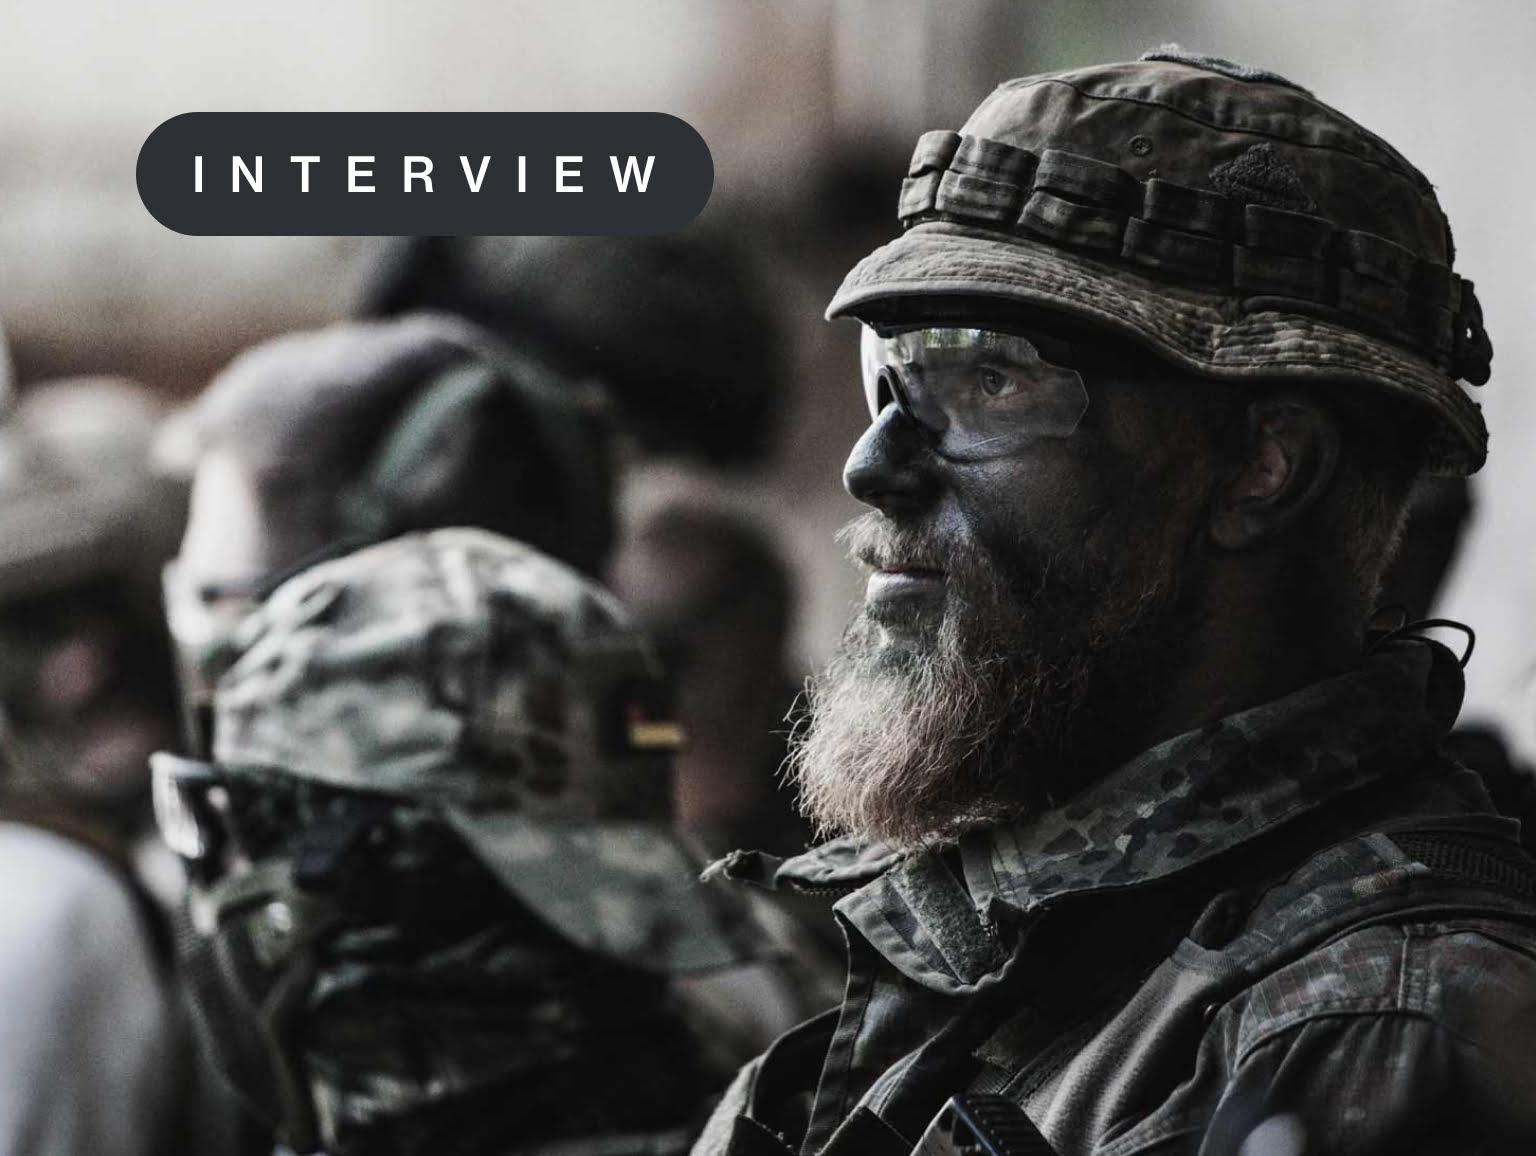 Media Interview: Instant Connect Achieves “Authority to Operate” with U.S. military & Government